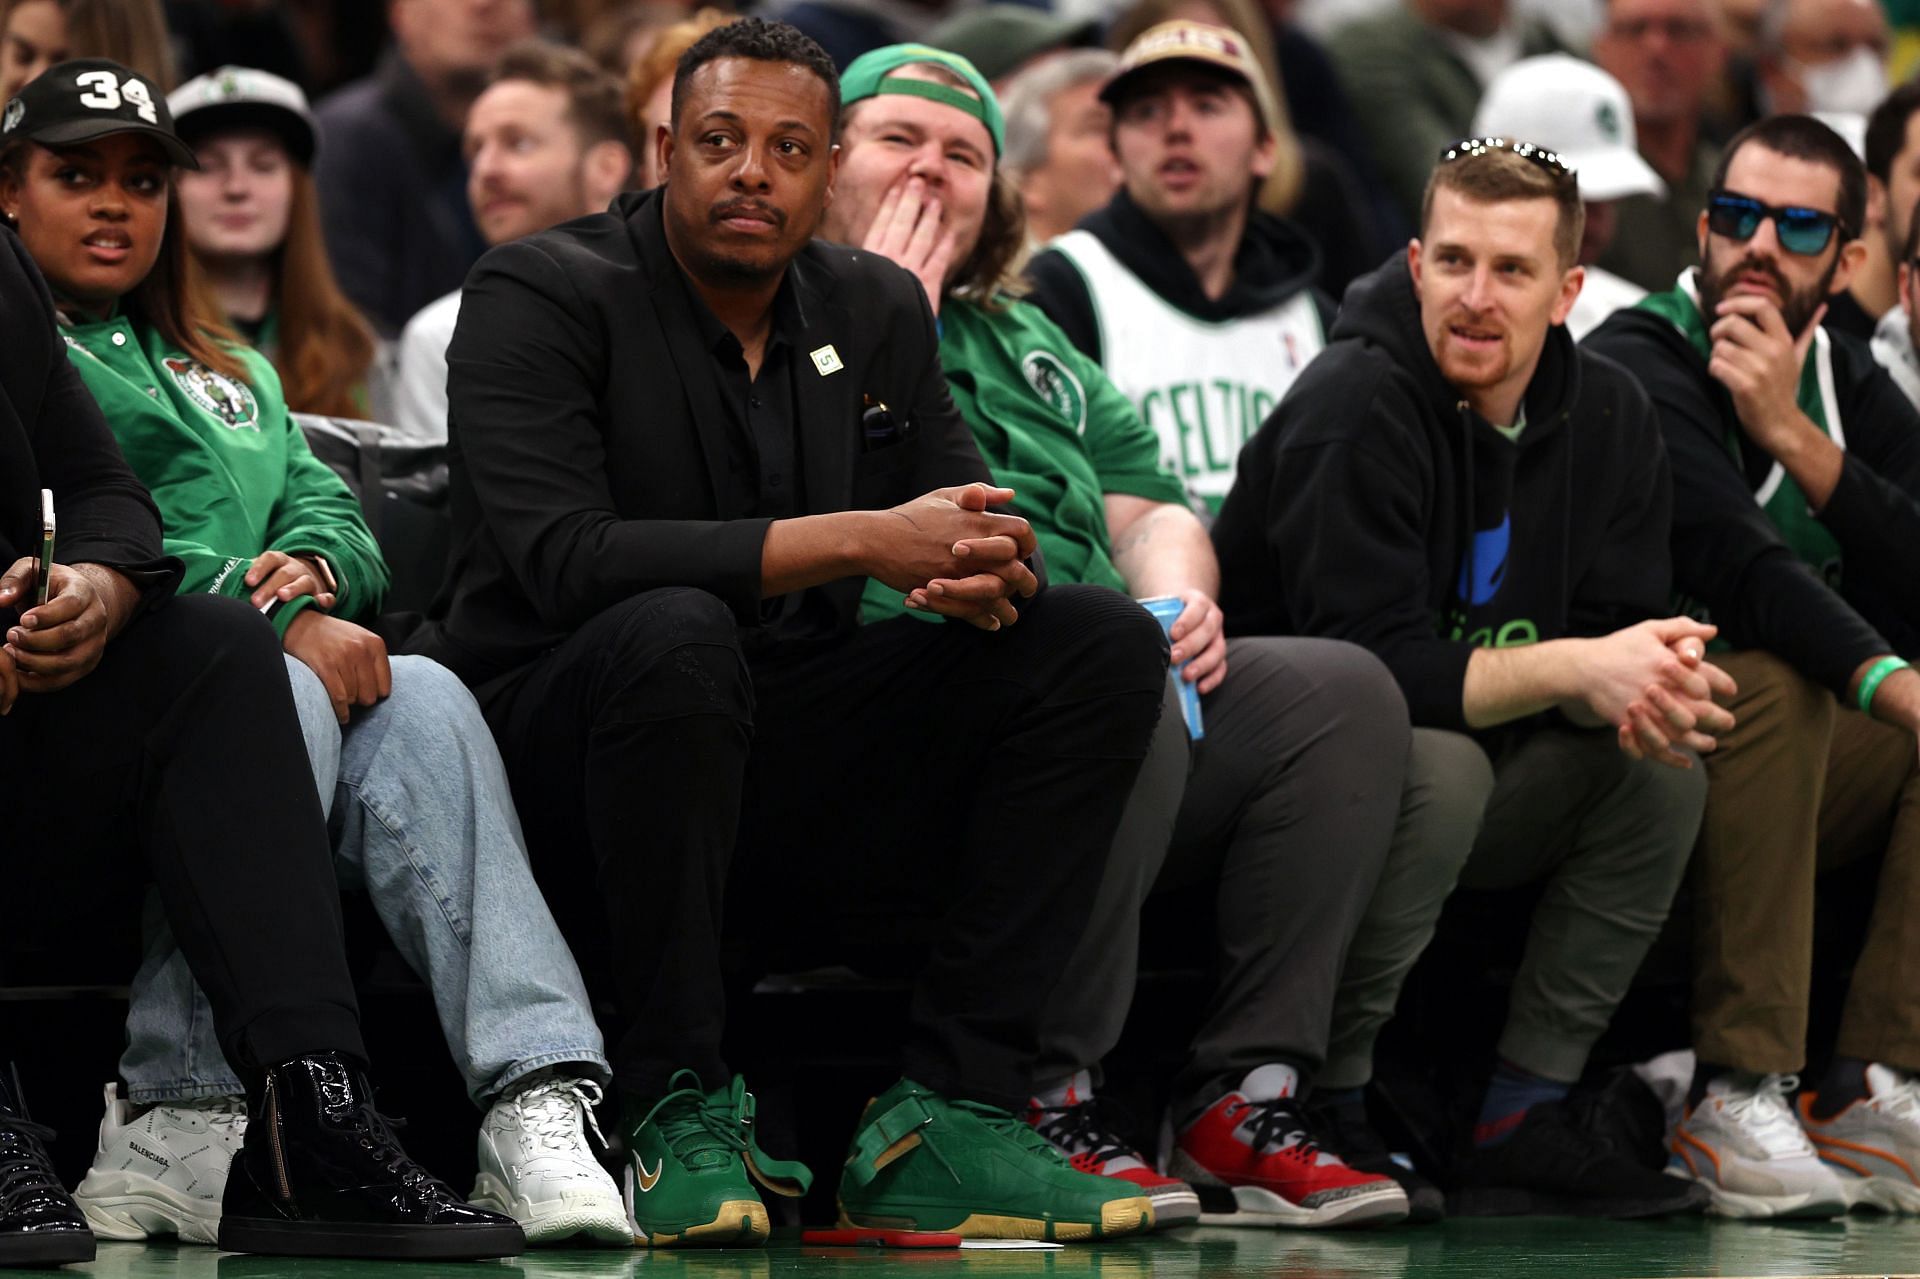 Paul Pierce was an NBA champion with the Celtics in 2008.